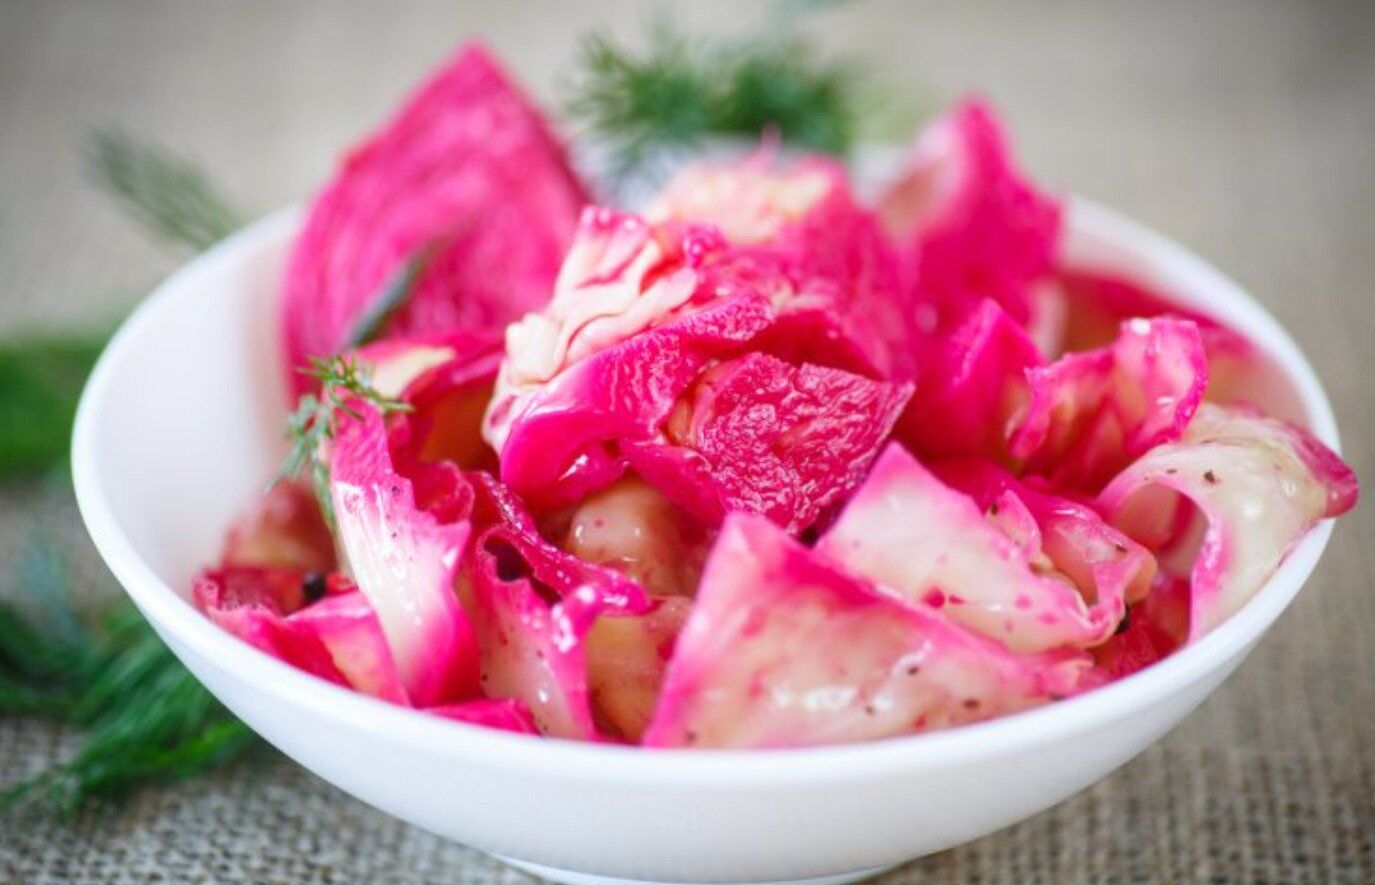 How to cook cabbage with beets